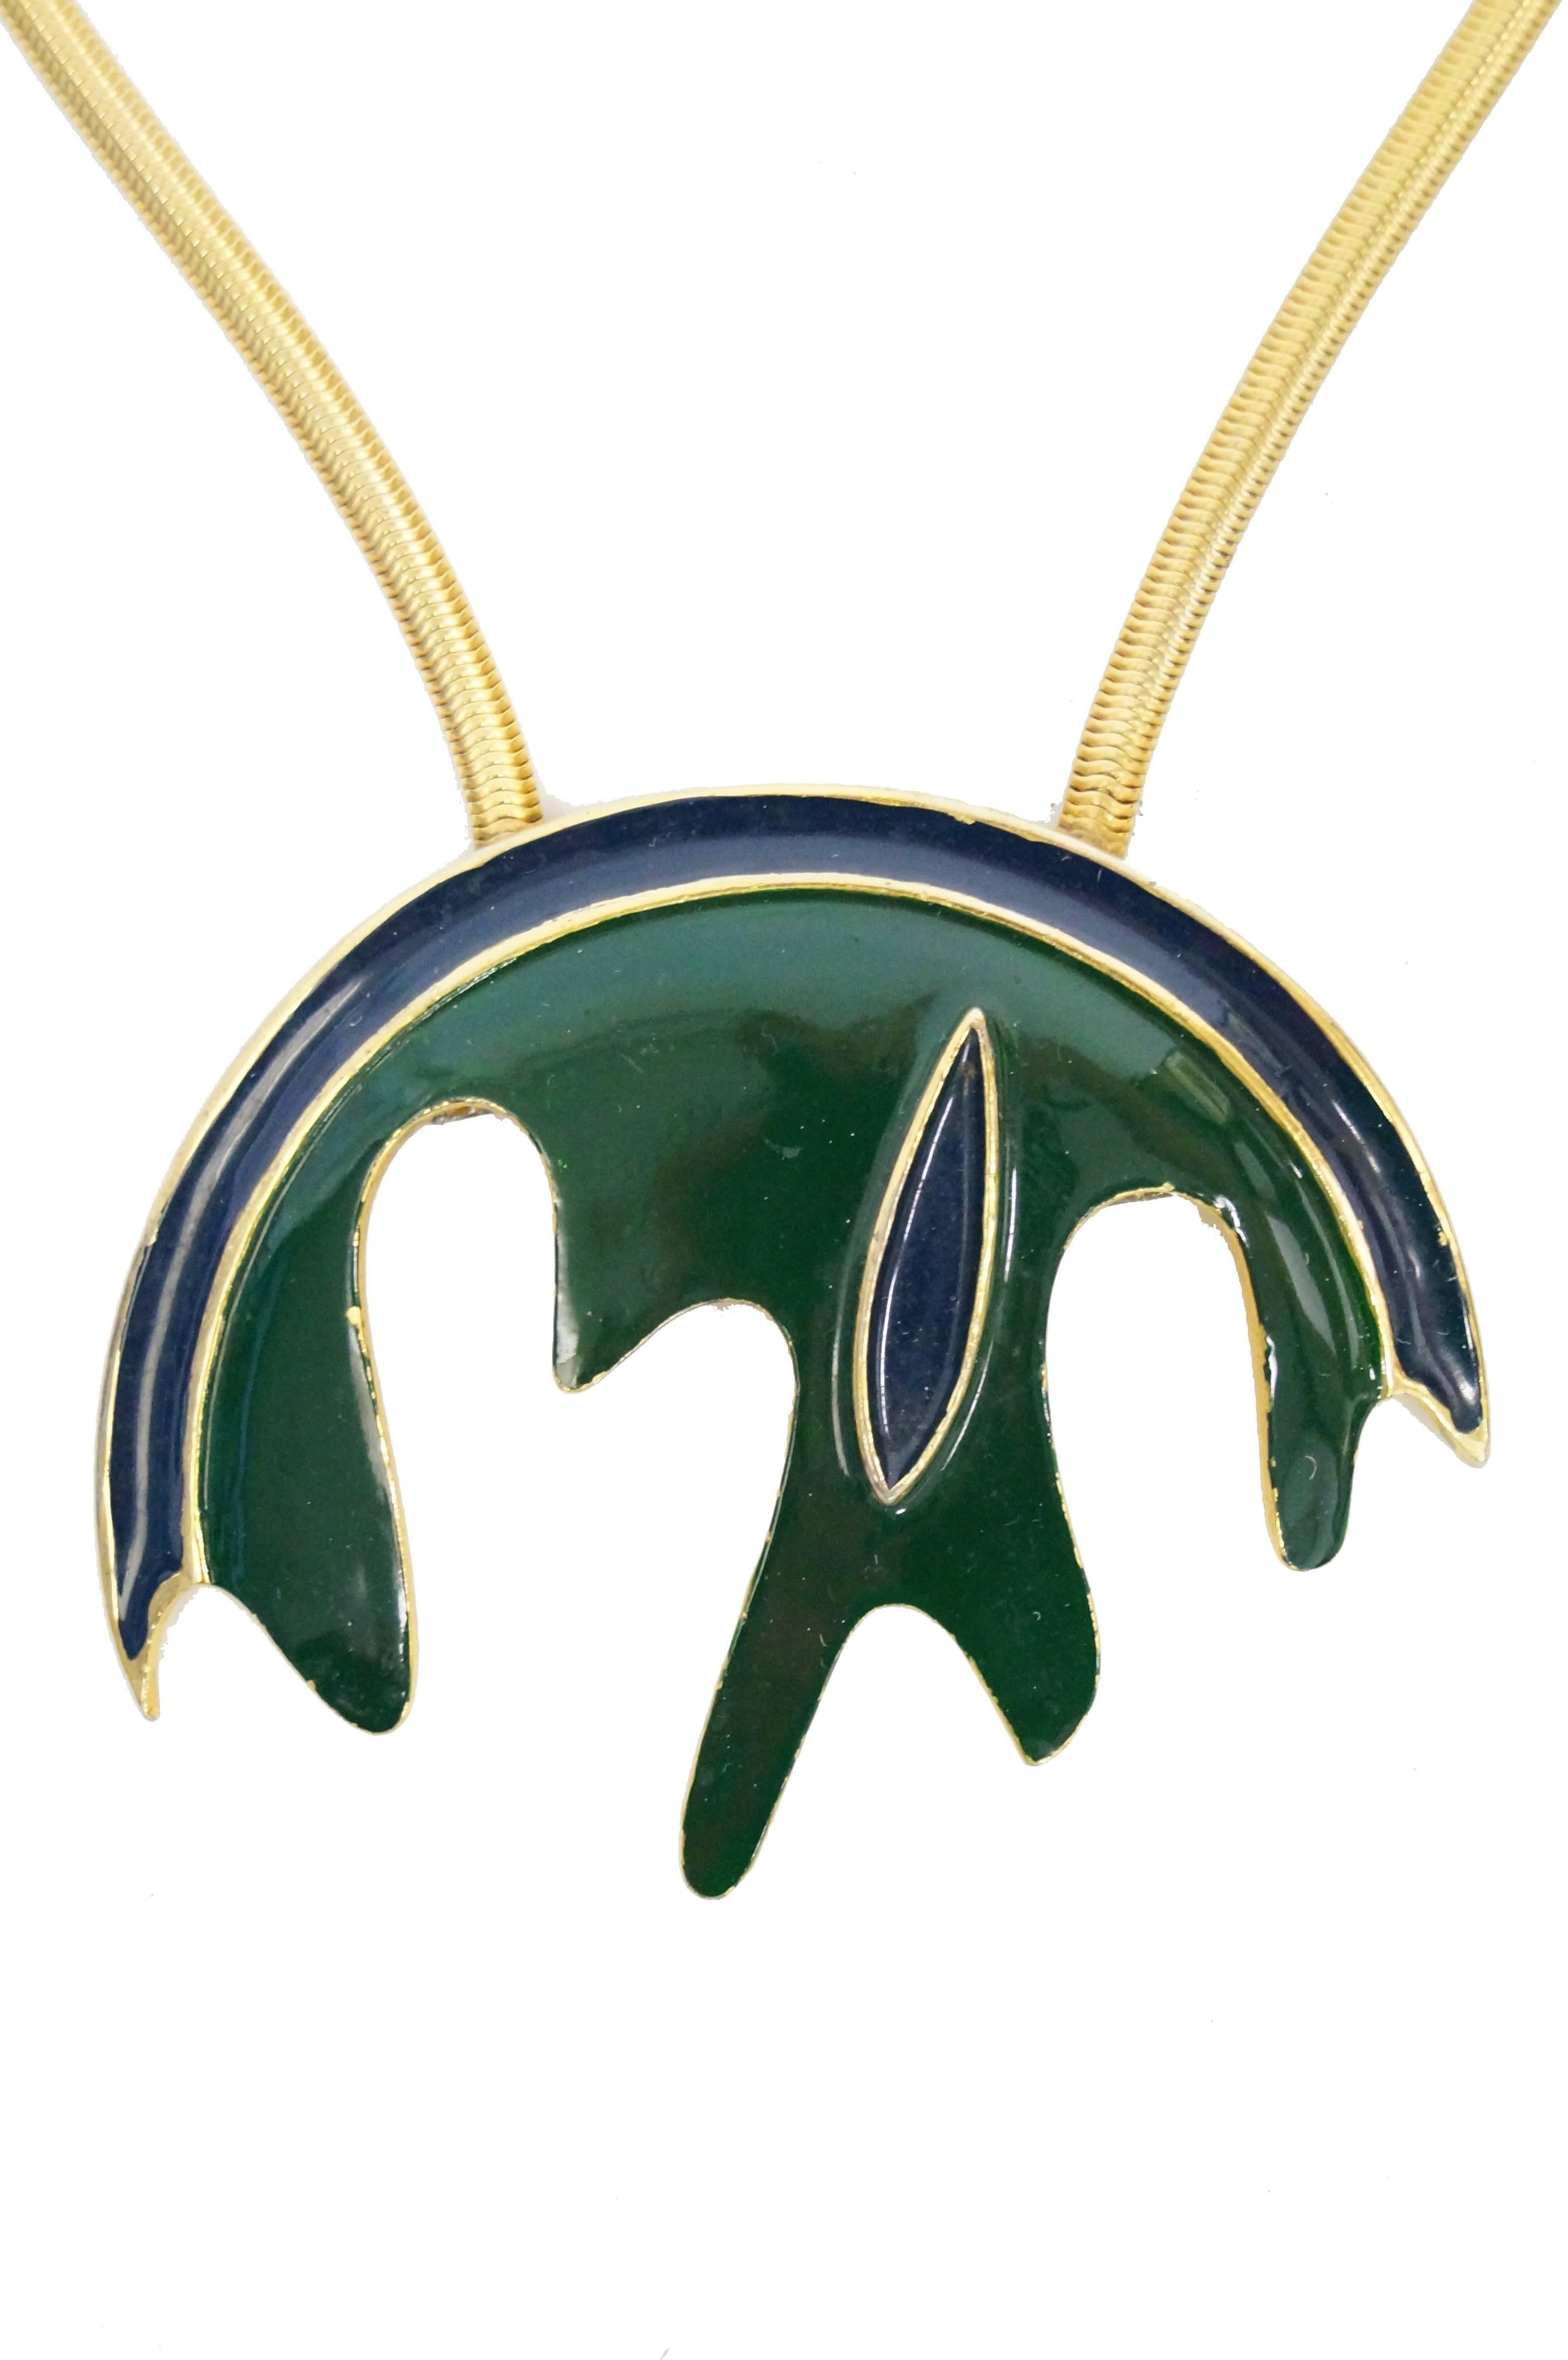 Brilliant modernist medallion necklace by Pierre Cardin. The necklace features an organic semi-circle of blue and green enamel suspended on a thick gold tone snake chain. The medallion pendant is composed of a green splash, making up the body of the